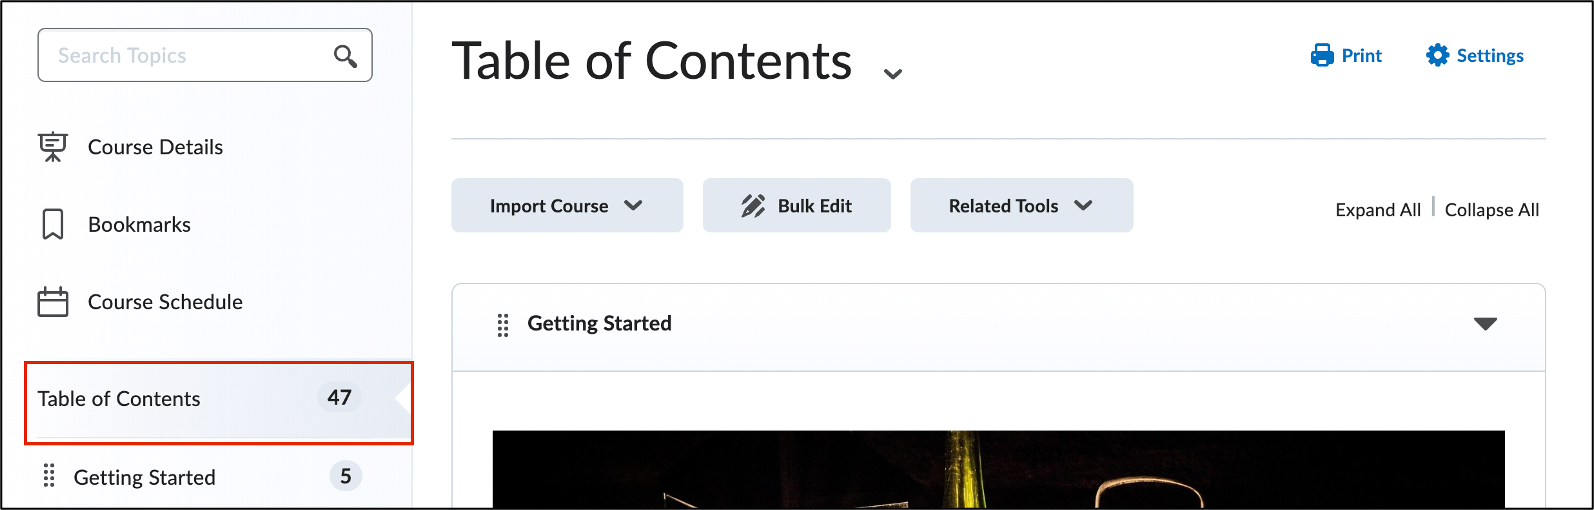 Screenshot of the Table of Contents in a Brightspace course.